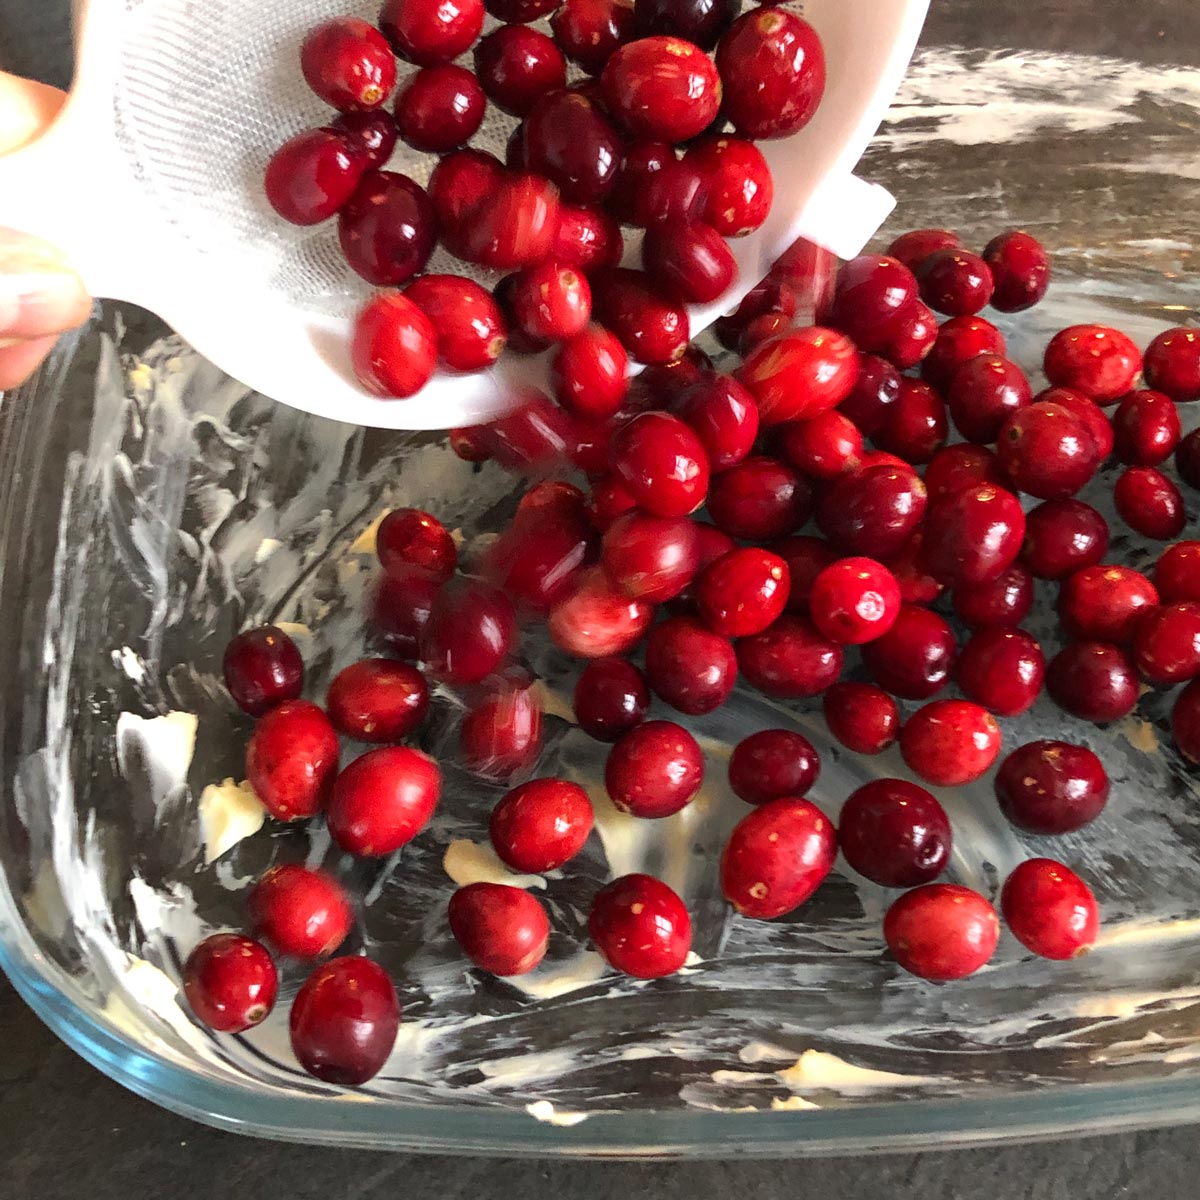 Cranberries in a baking dish.